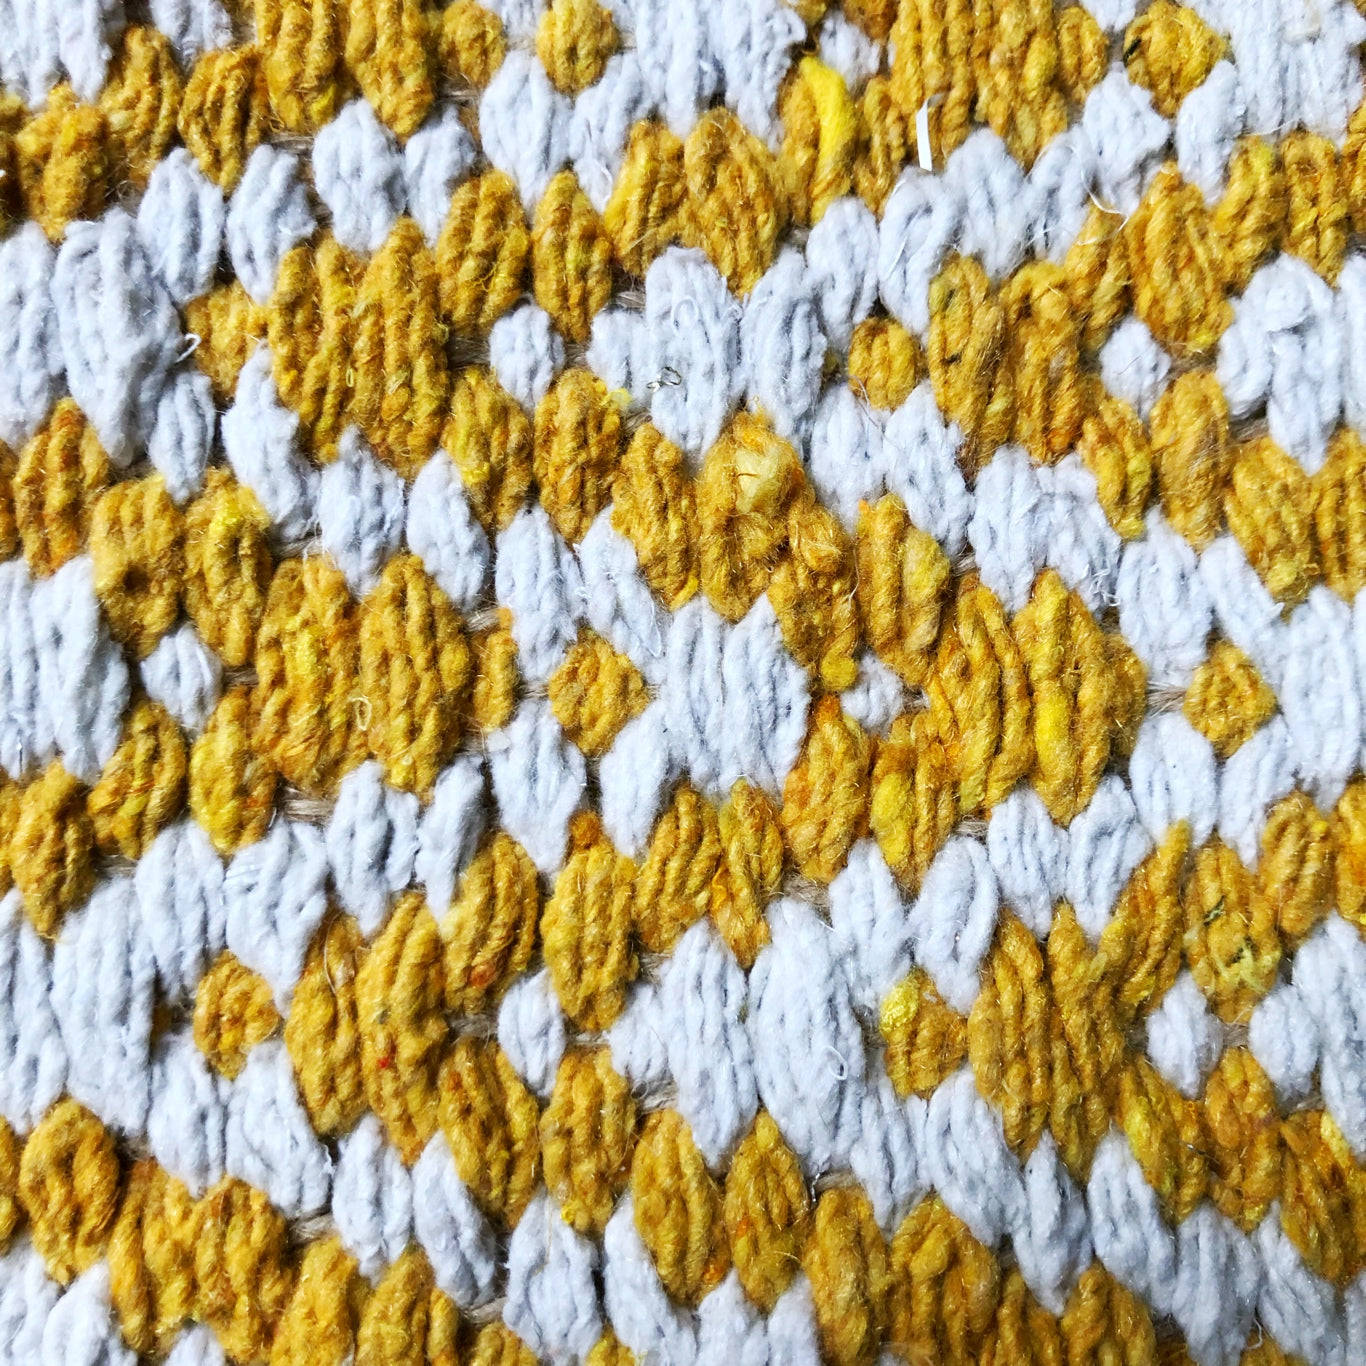 Gold Zig Zag Rug Re-cycled Cotton